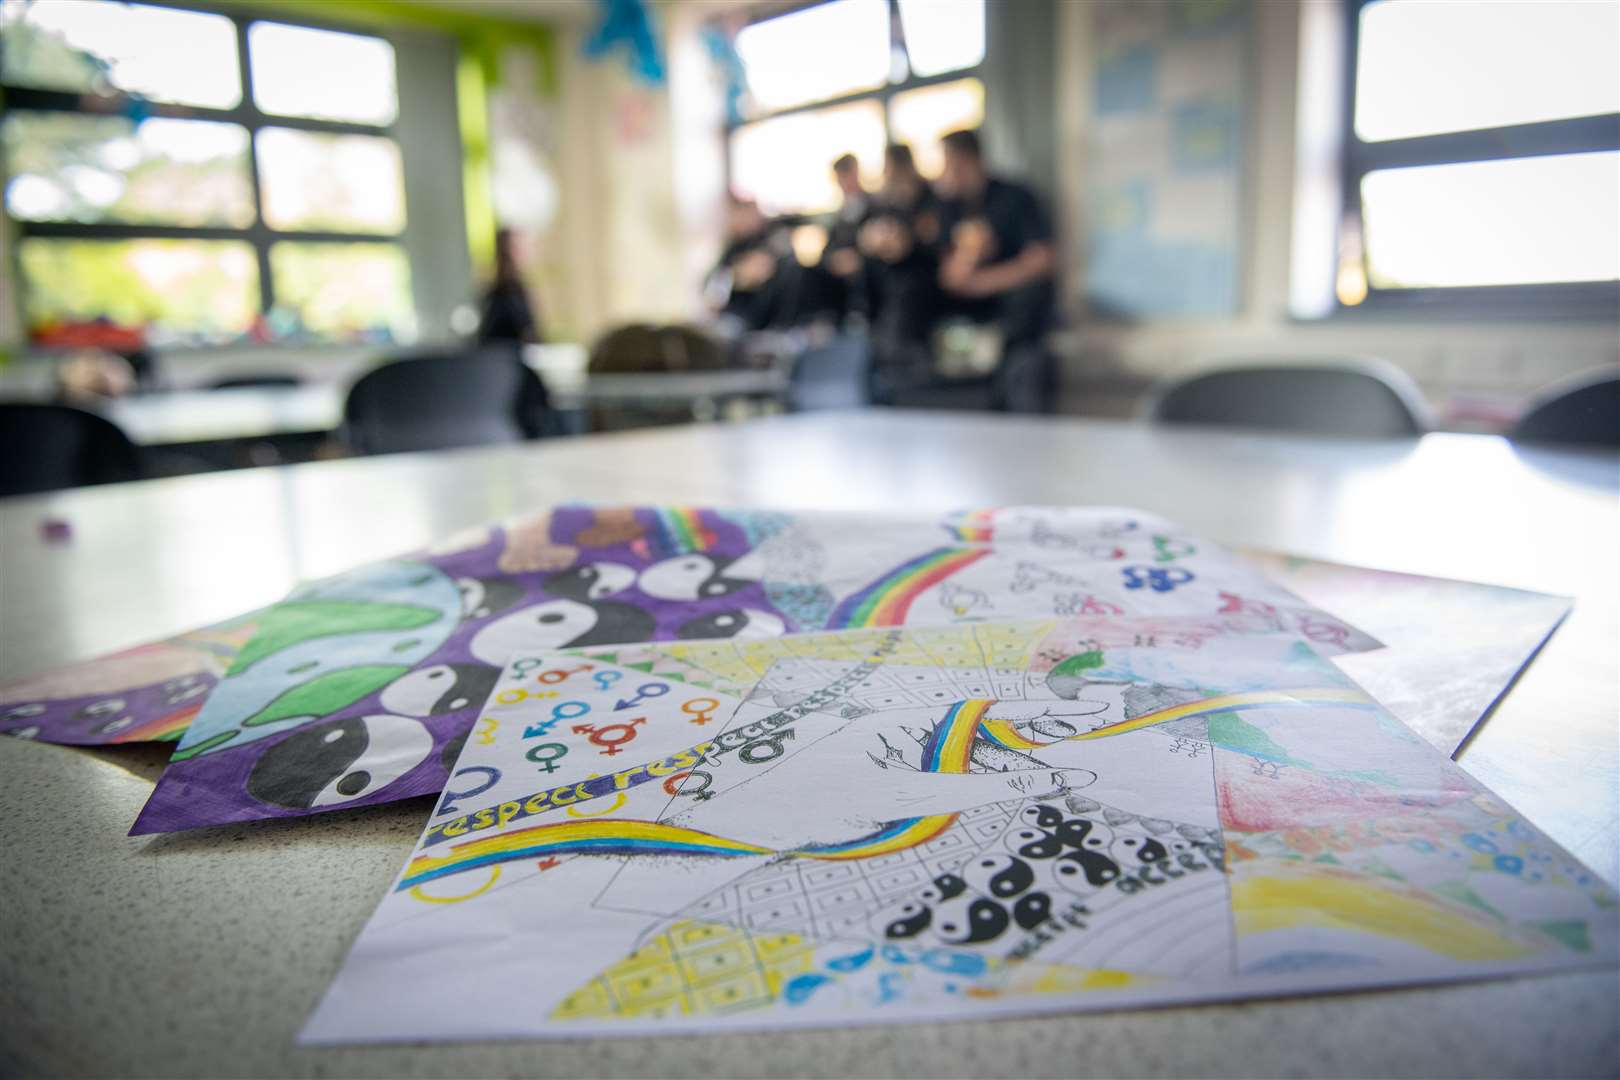 The drop in session provides a social space for LGBT+ pupils and friends. Picture: Callum Mackay